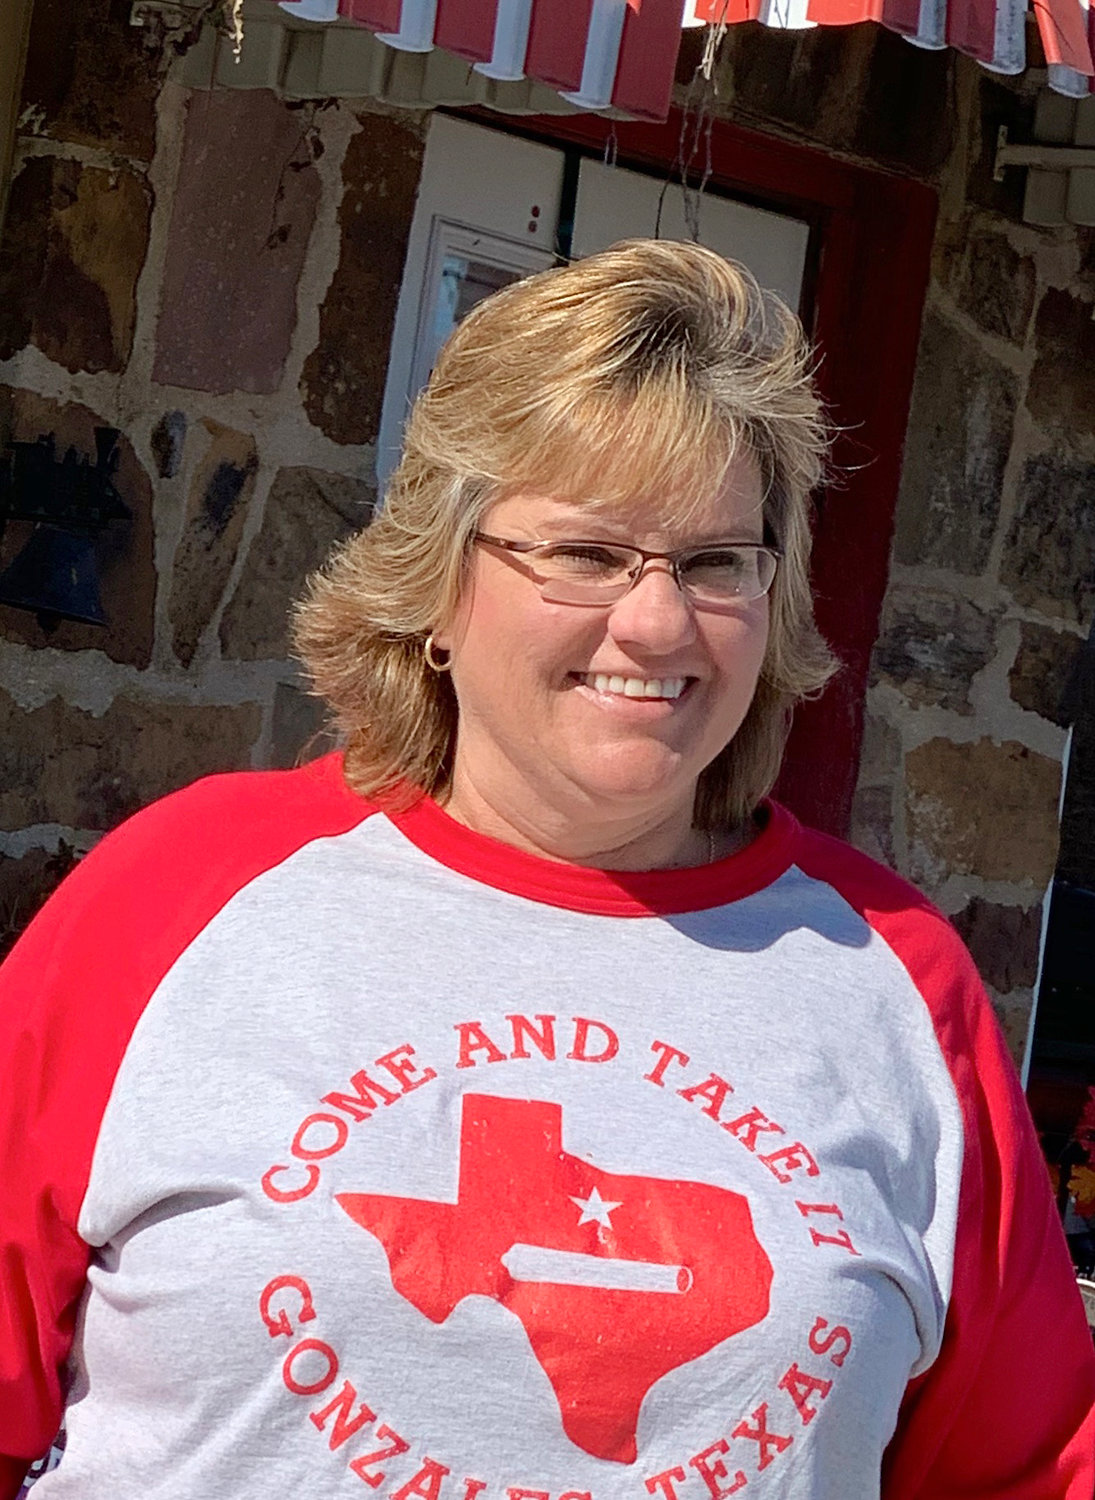 Multi-sport coach Kim Payne brings to the Apaches experience at many sports, including volleyball and softball.